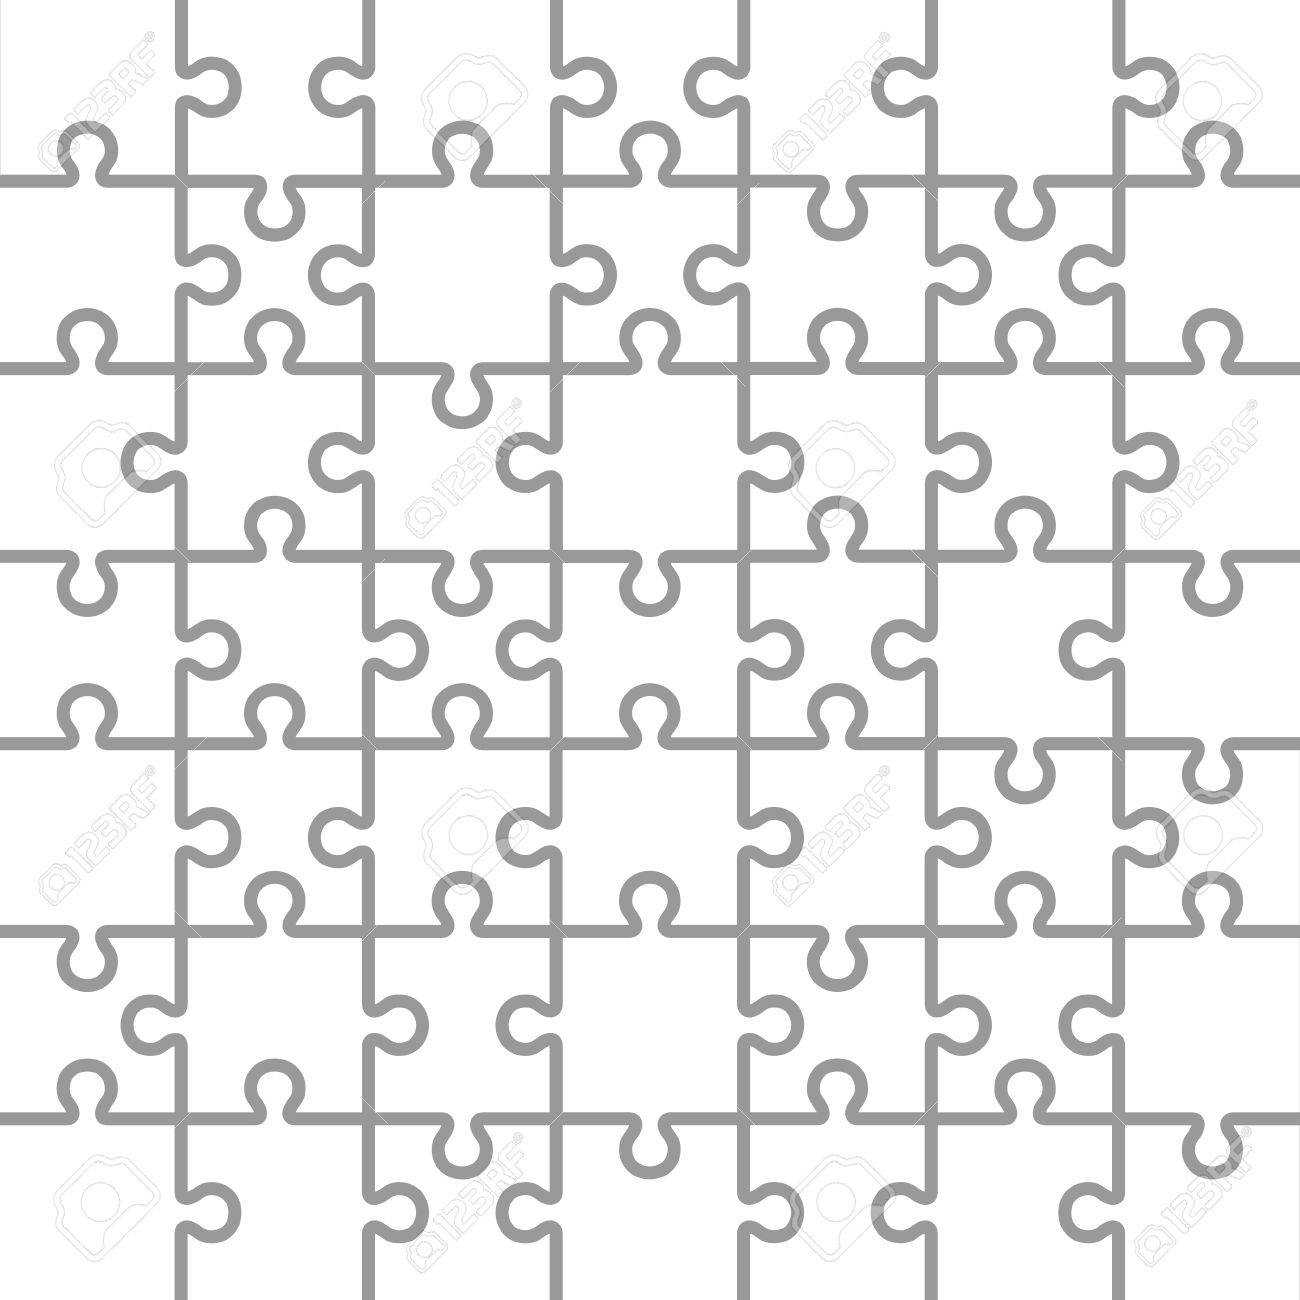 Jigsaw Puzzle White Blank Parts Template. 7X7 Pieces. Within Blank Jigsaw Piece Template